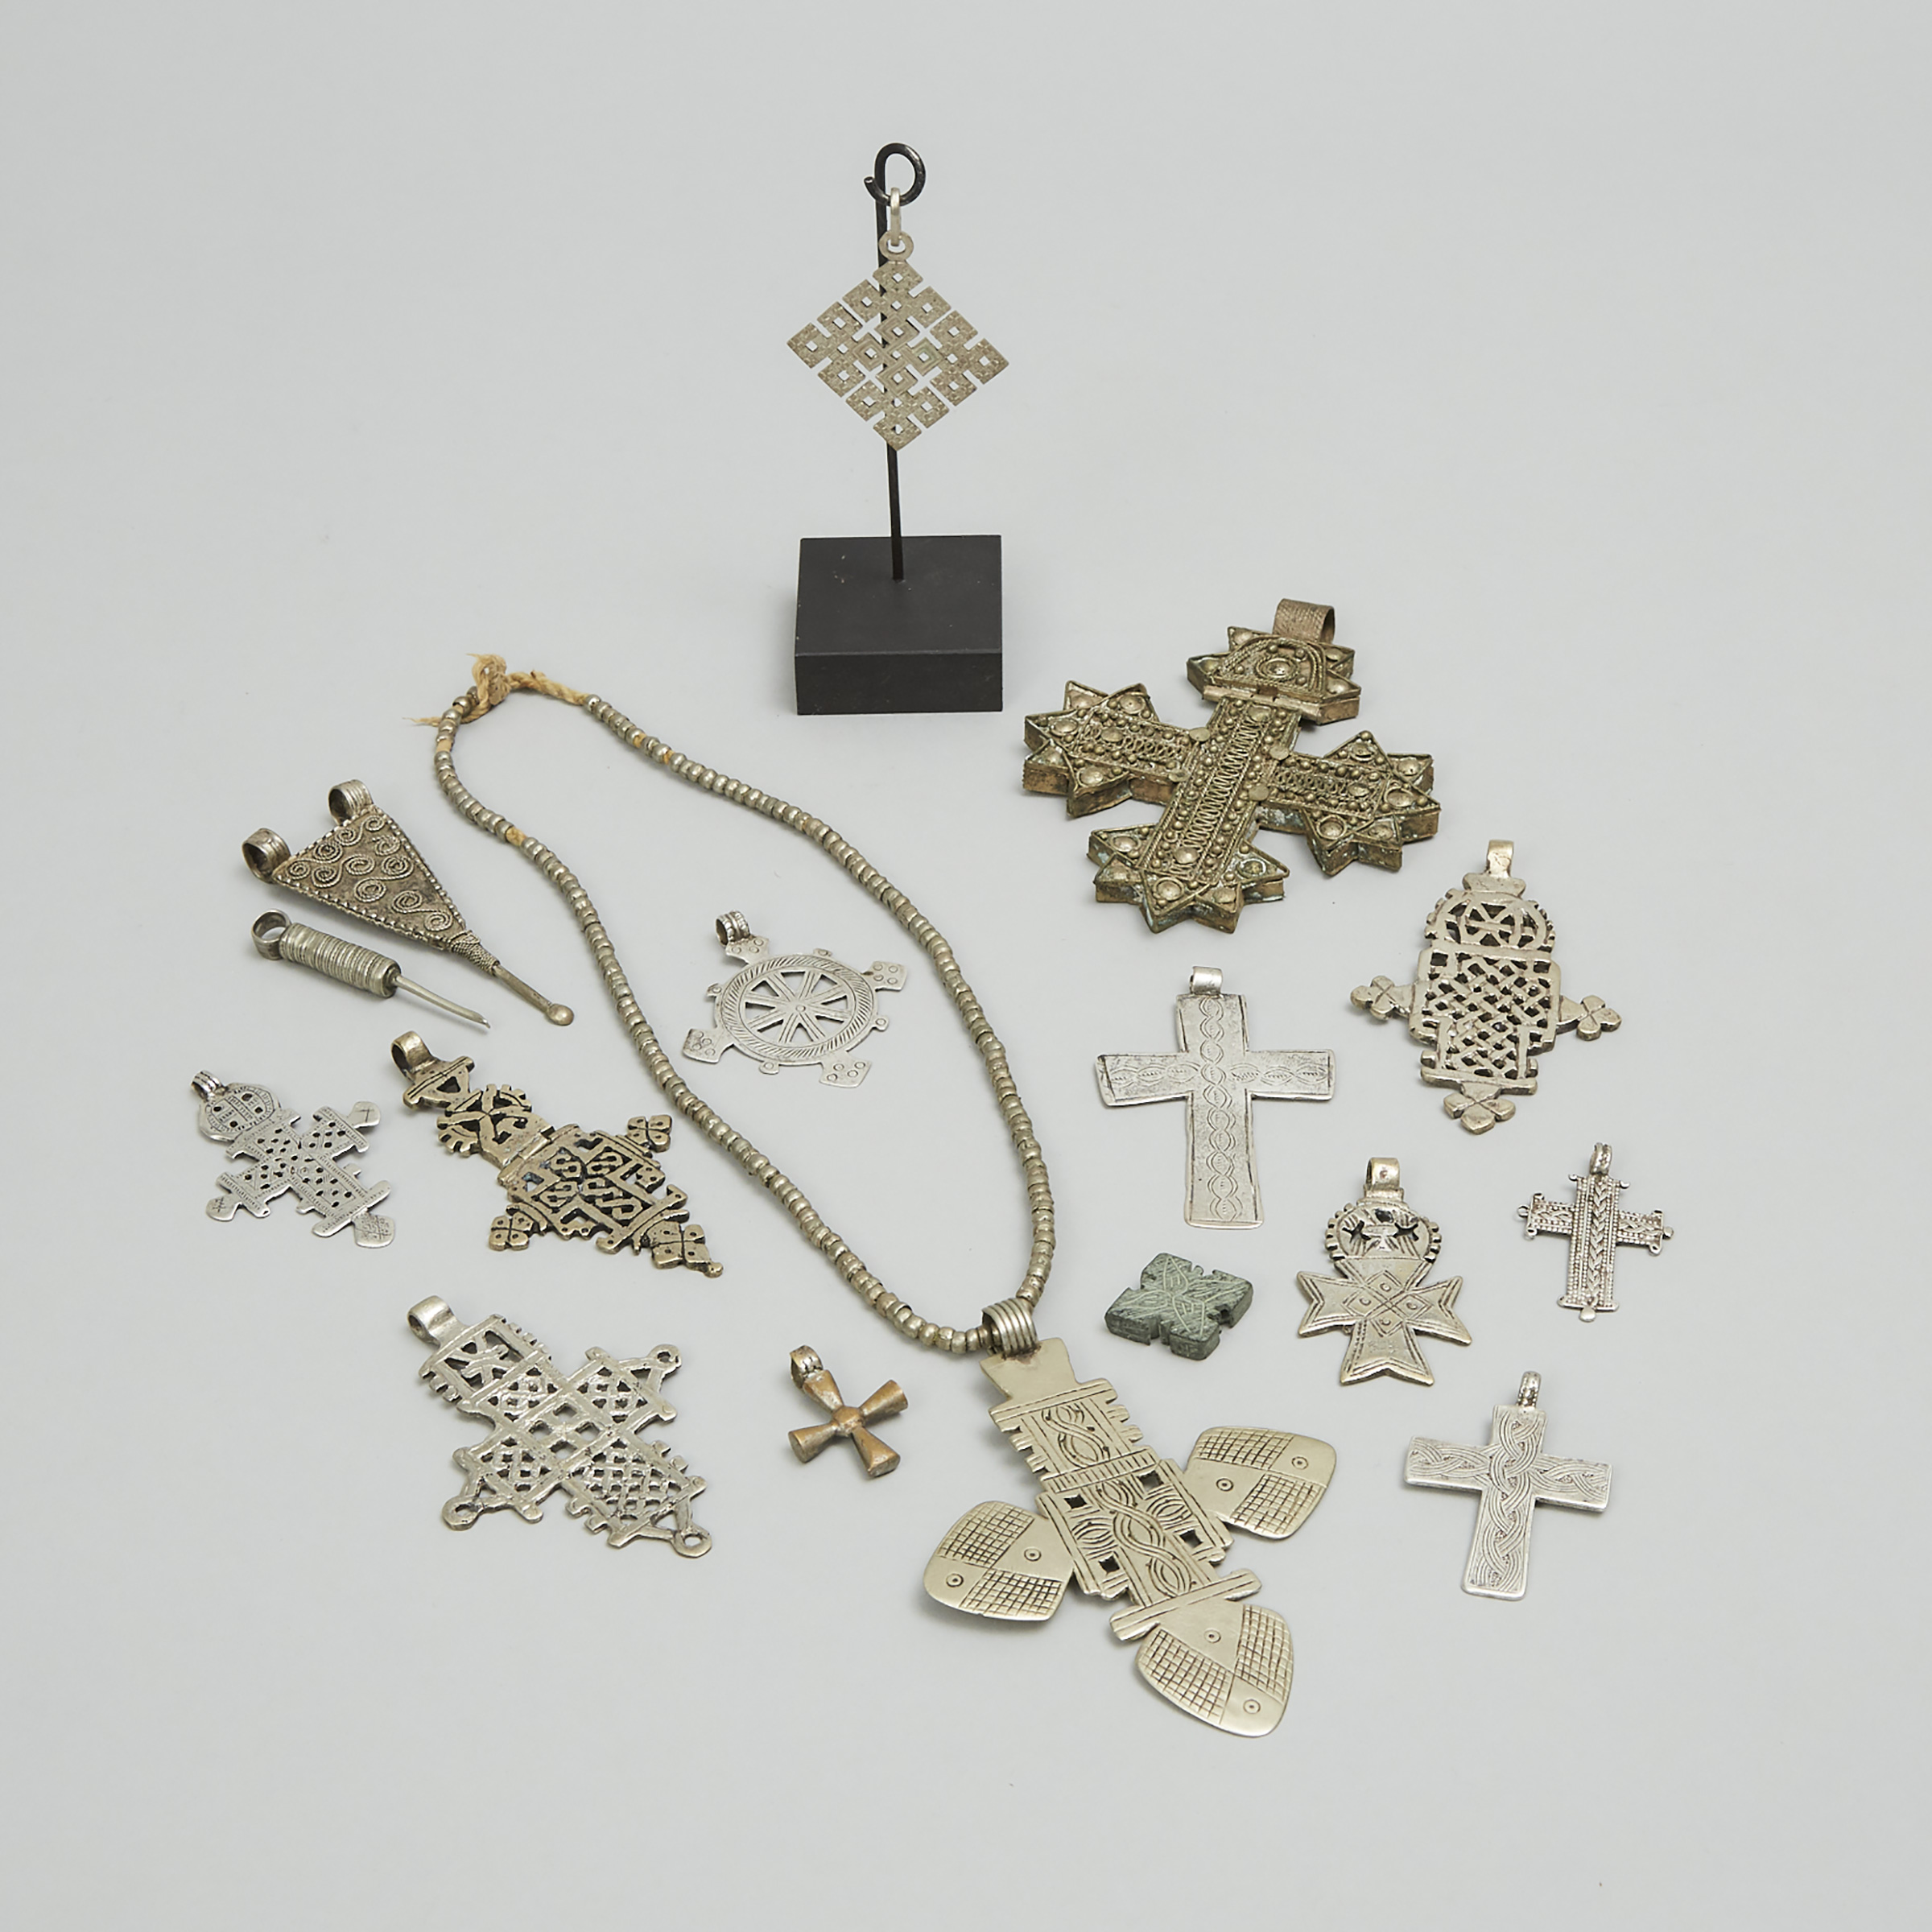 Fifteen Abyssinian/Ethiopian Silver and Silvered Brass Mostly Coptic Pendant Crosses, early-mid 20th century